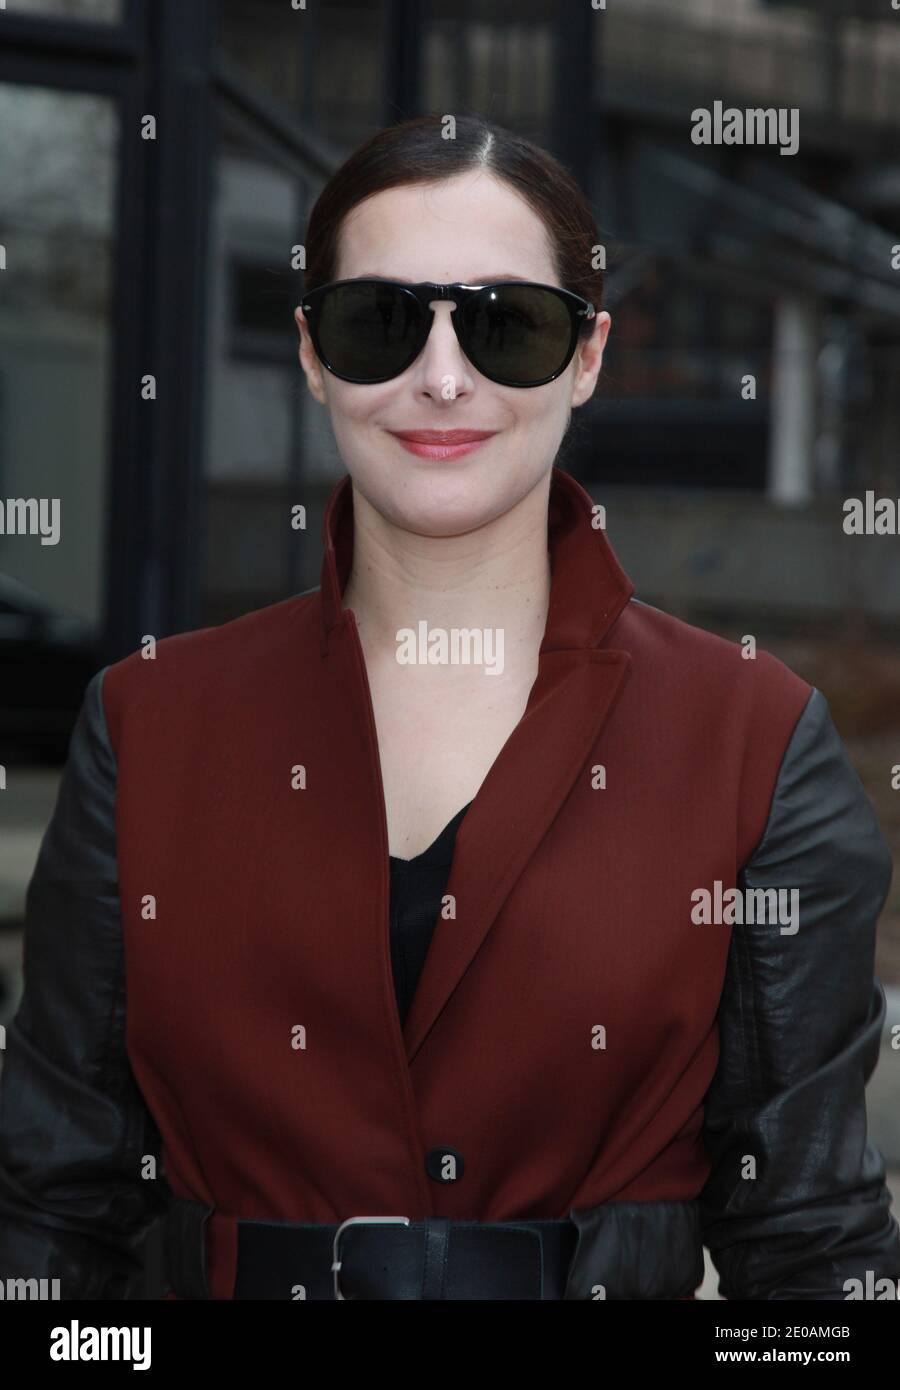 Amira Casar attends Balenciaga's Fall-Winter 2012-2013 Ready-To-Wear collection show held at Quai Javel in Paris, France, on March 1, 2012, as part of the Paris Fashion Week. Photo by Denis Guignebourg/ABACAPRESS.COM Stock Photo